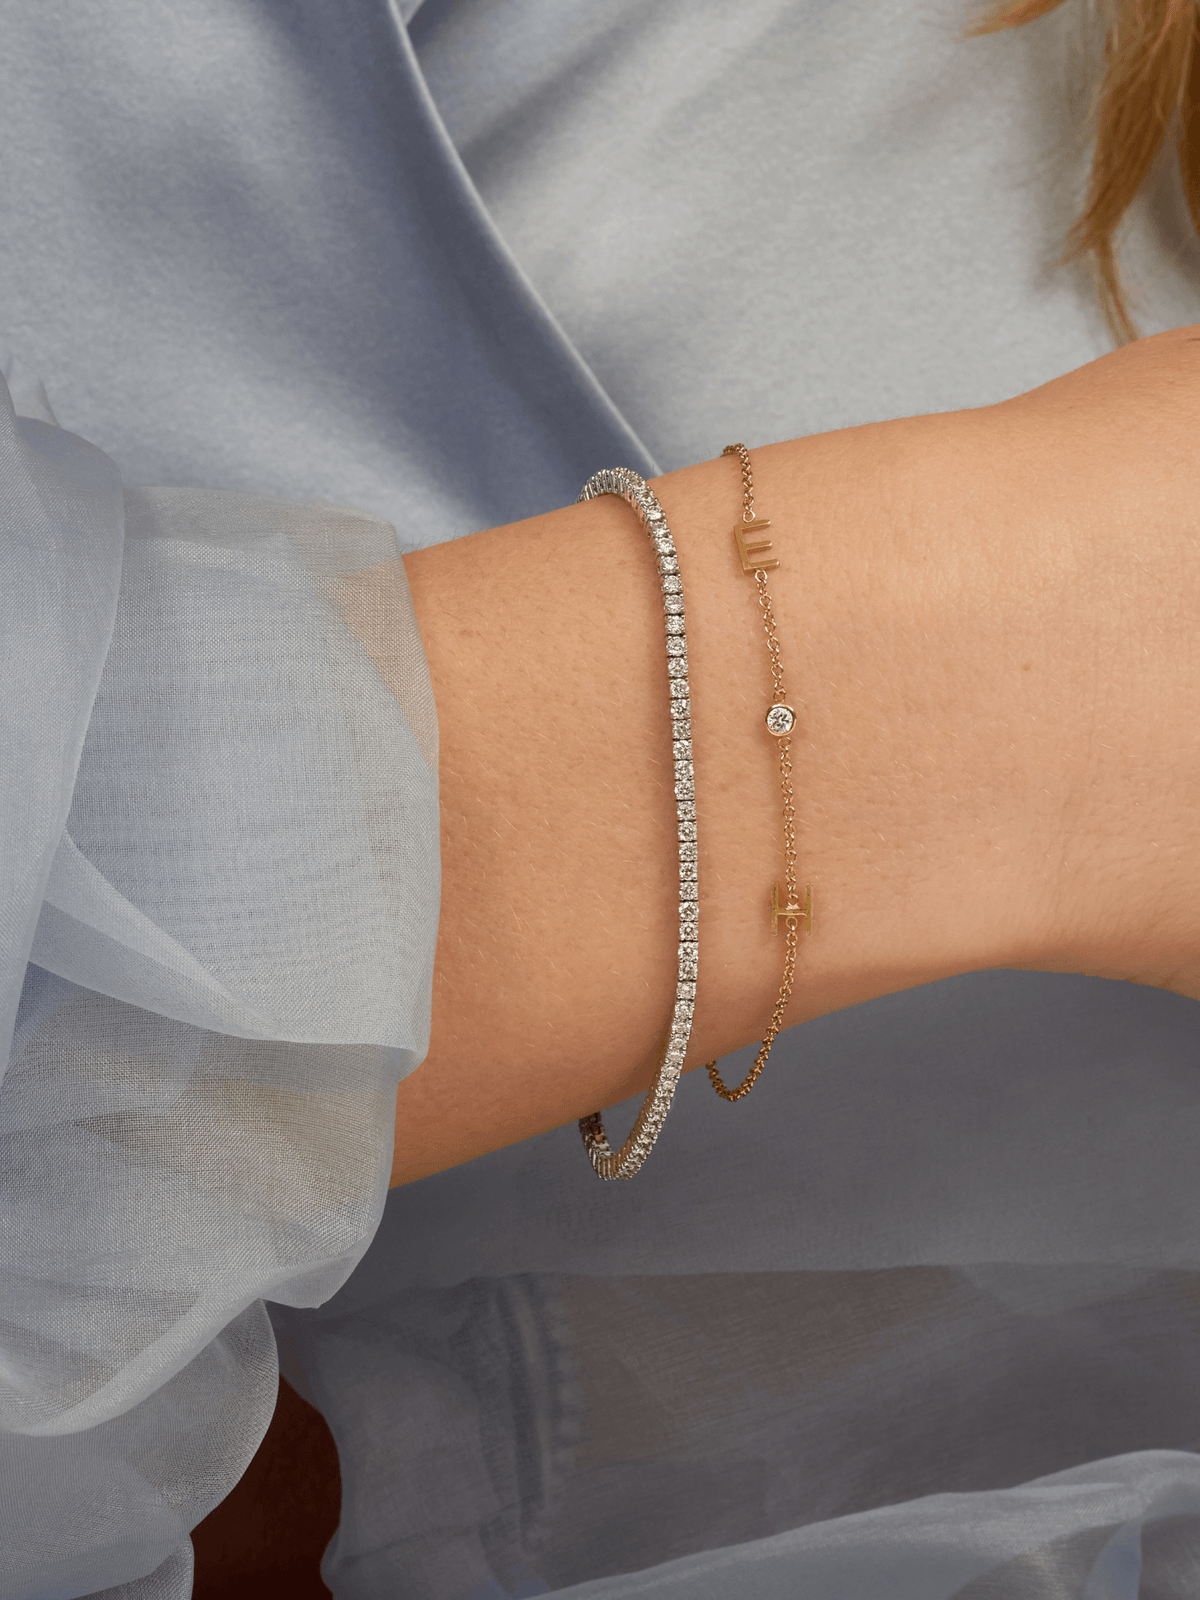 Dainty gold chain bracelet with two initials and single diamond layered with diamond tennis bracelet